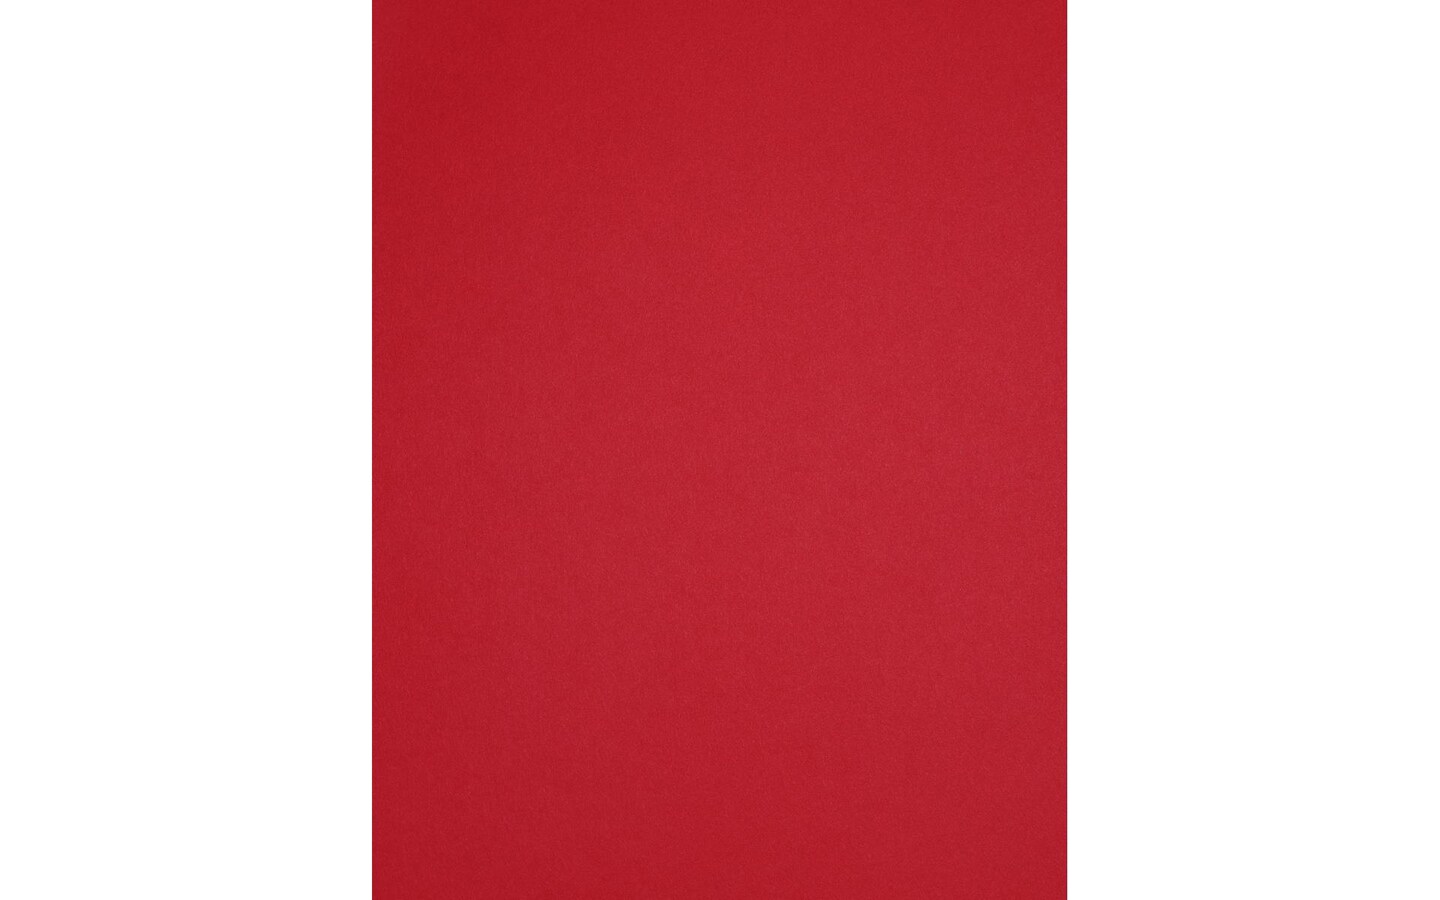 PA Paper Accents Smooth Cardstock 8.5&#x22; x 11&#x22; Dark Red, 65lb colored cardstock paper for card making, scrapbooking, printing, quilling and crafts, 25 piece pack